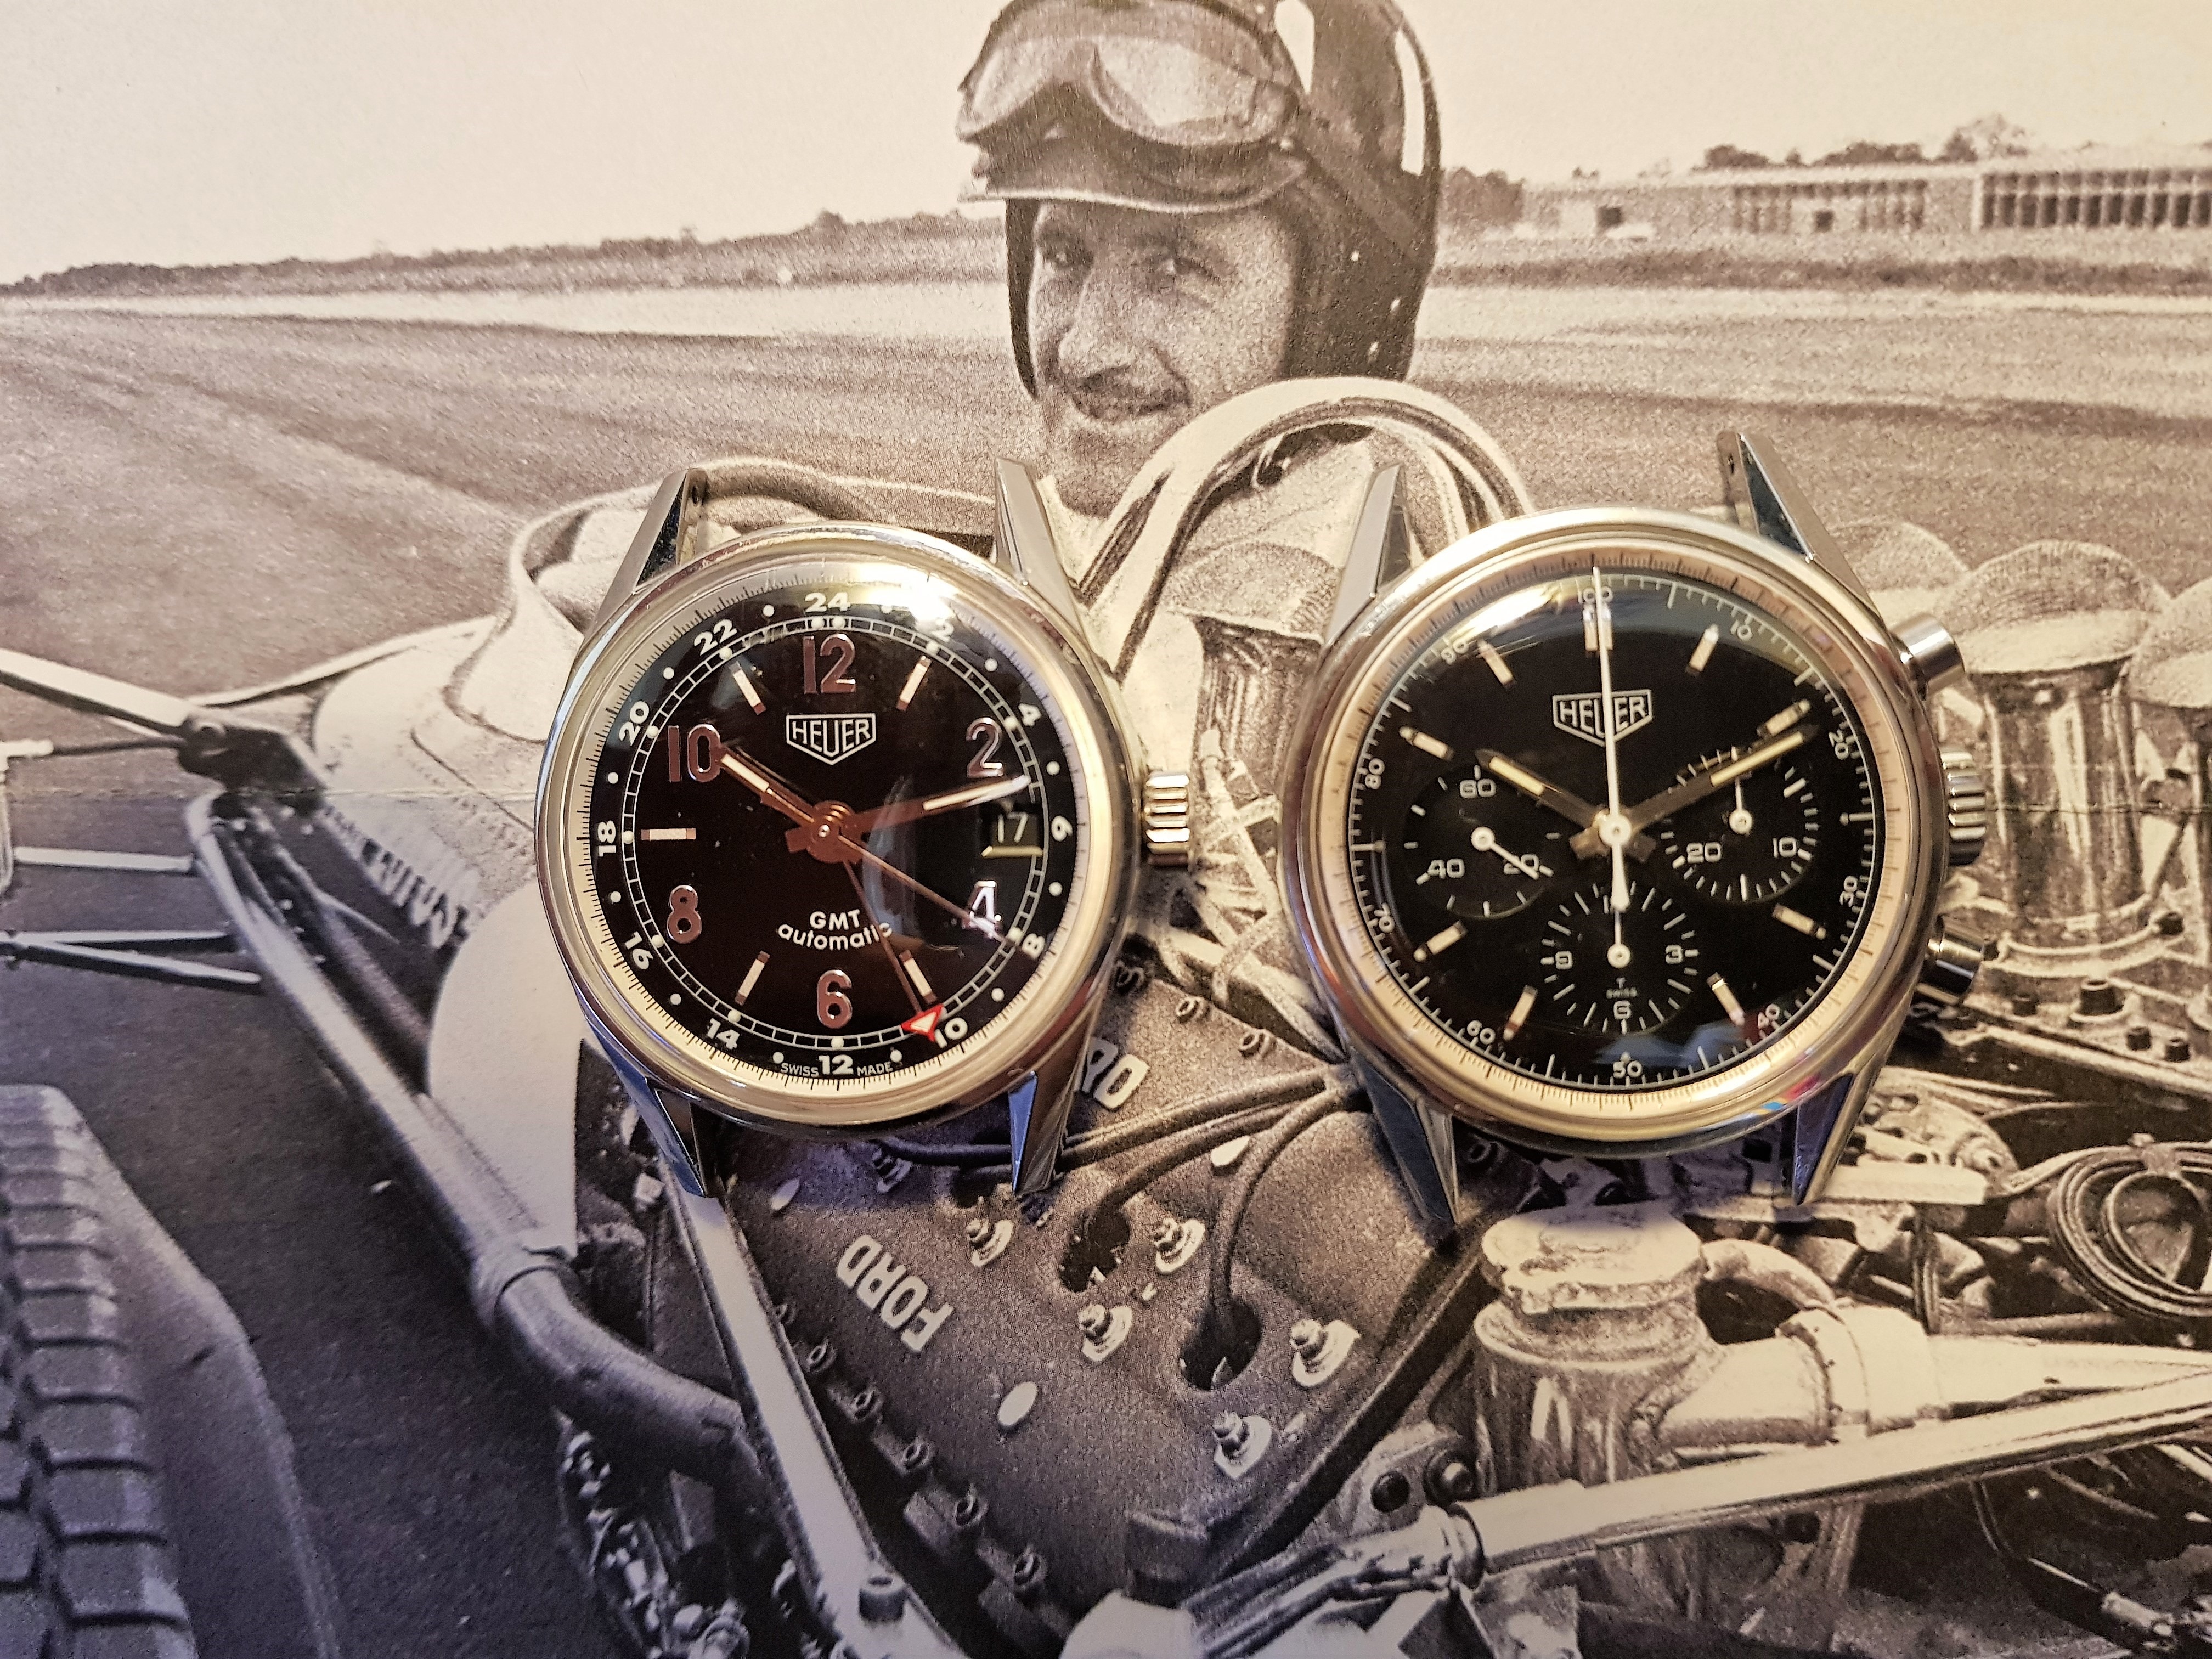 Heuer Carrera WS2113 and CS3111 re-editions